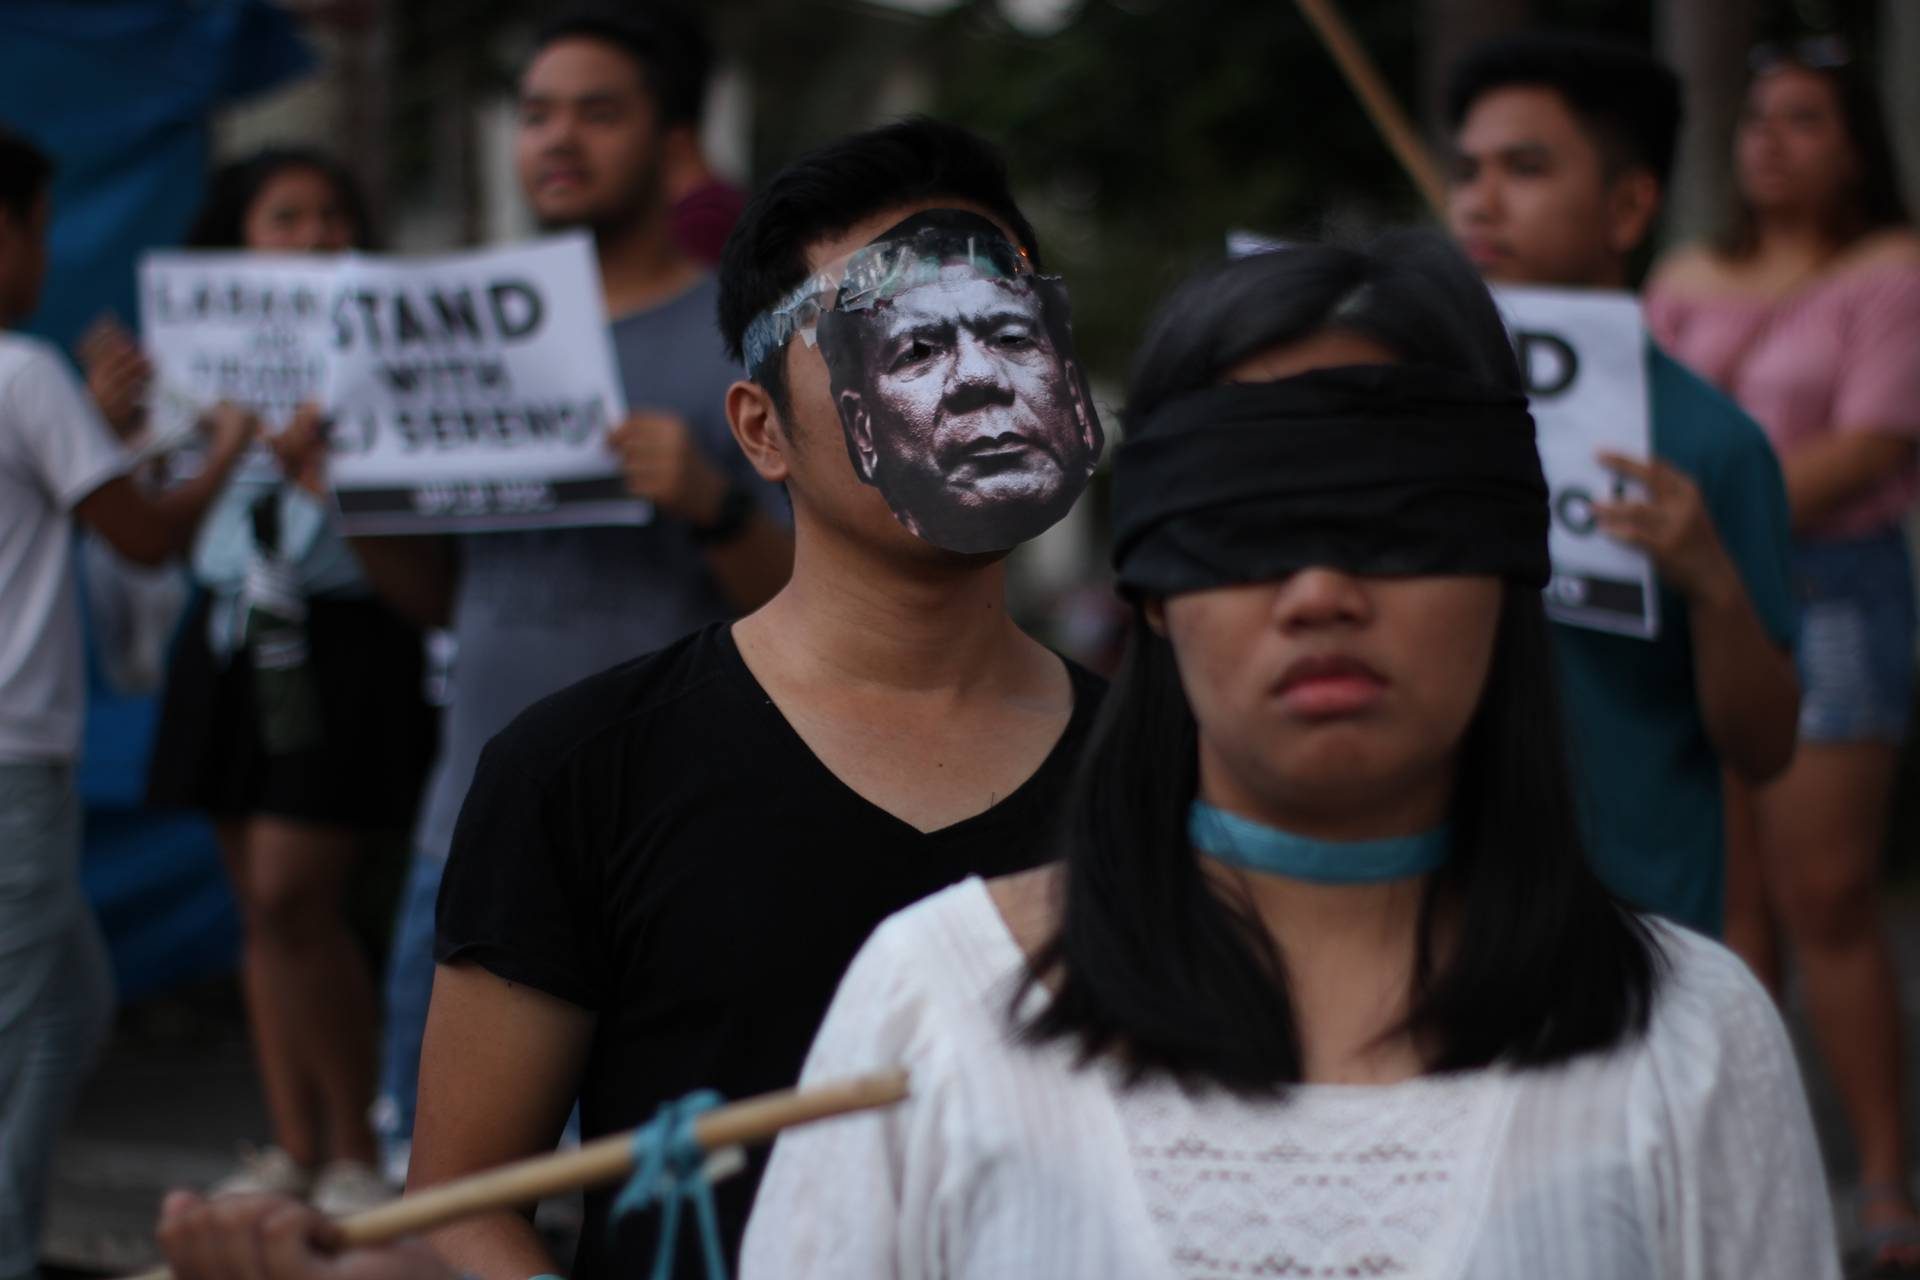 LOOK: UPLB students hold indignation protest against Sereno ouster